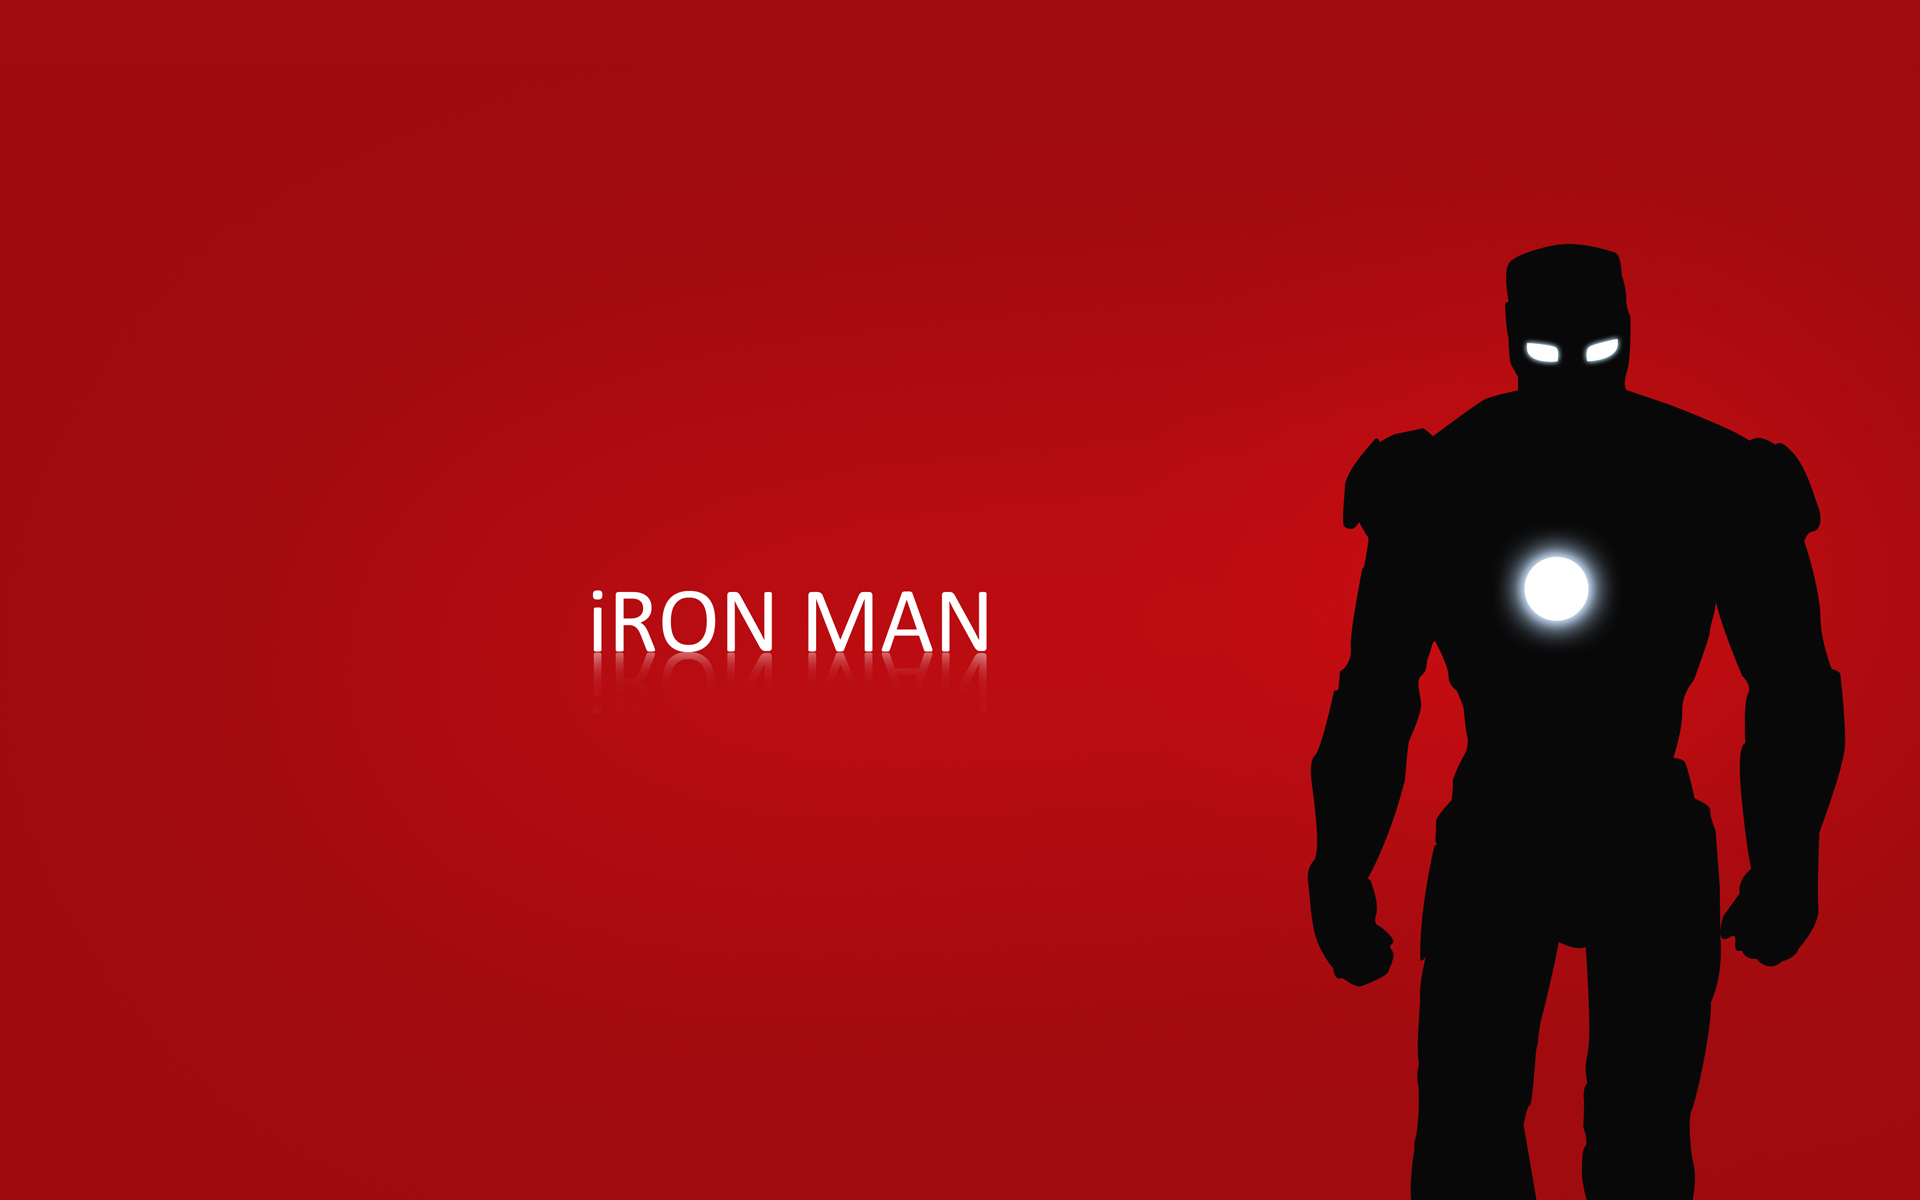 Red Marvel Wallpapers